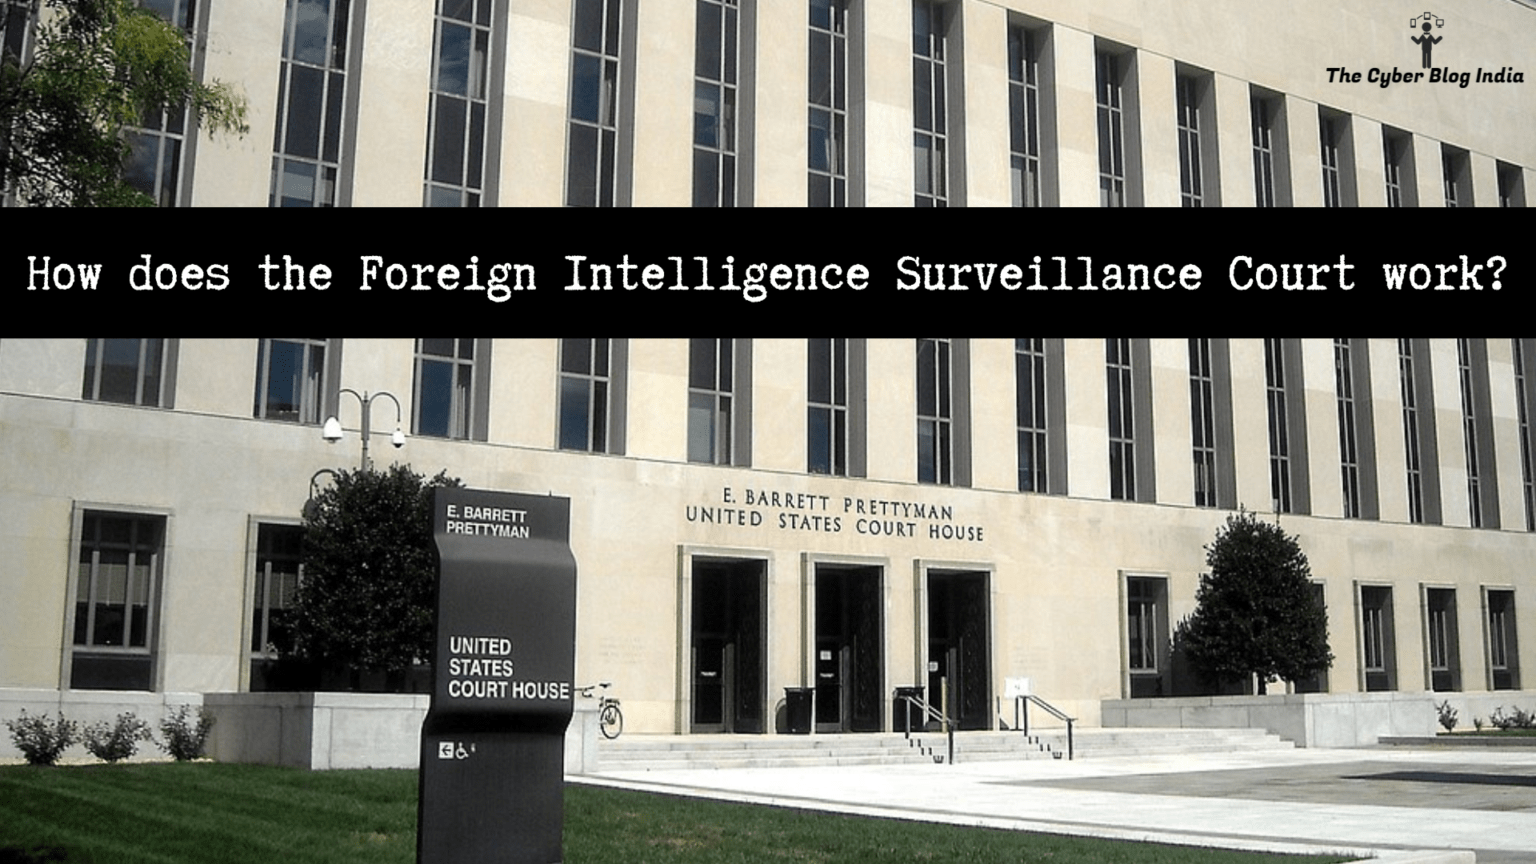 How does the Foreign Intelligence Surveillance Court work?